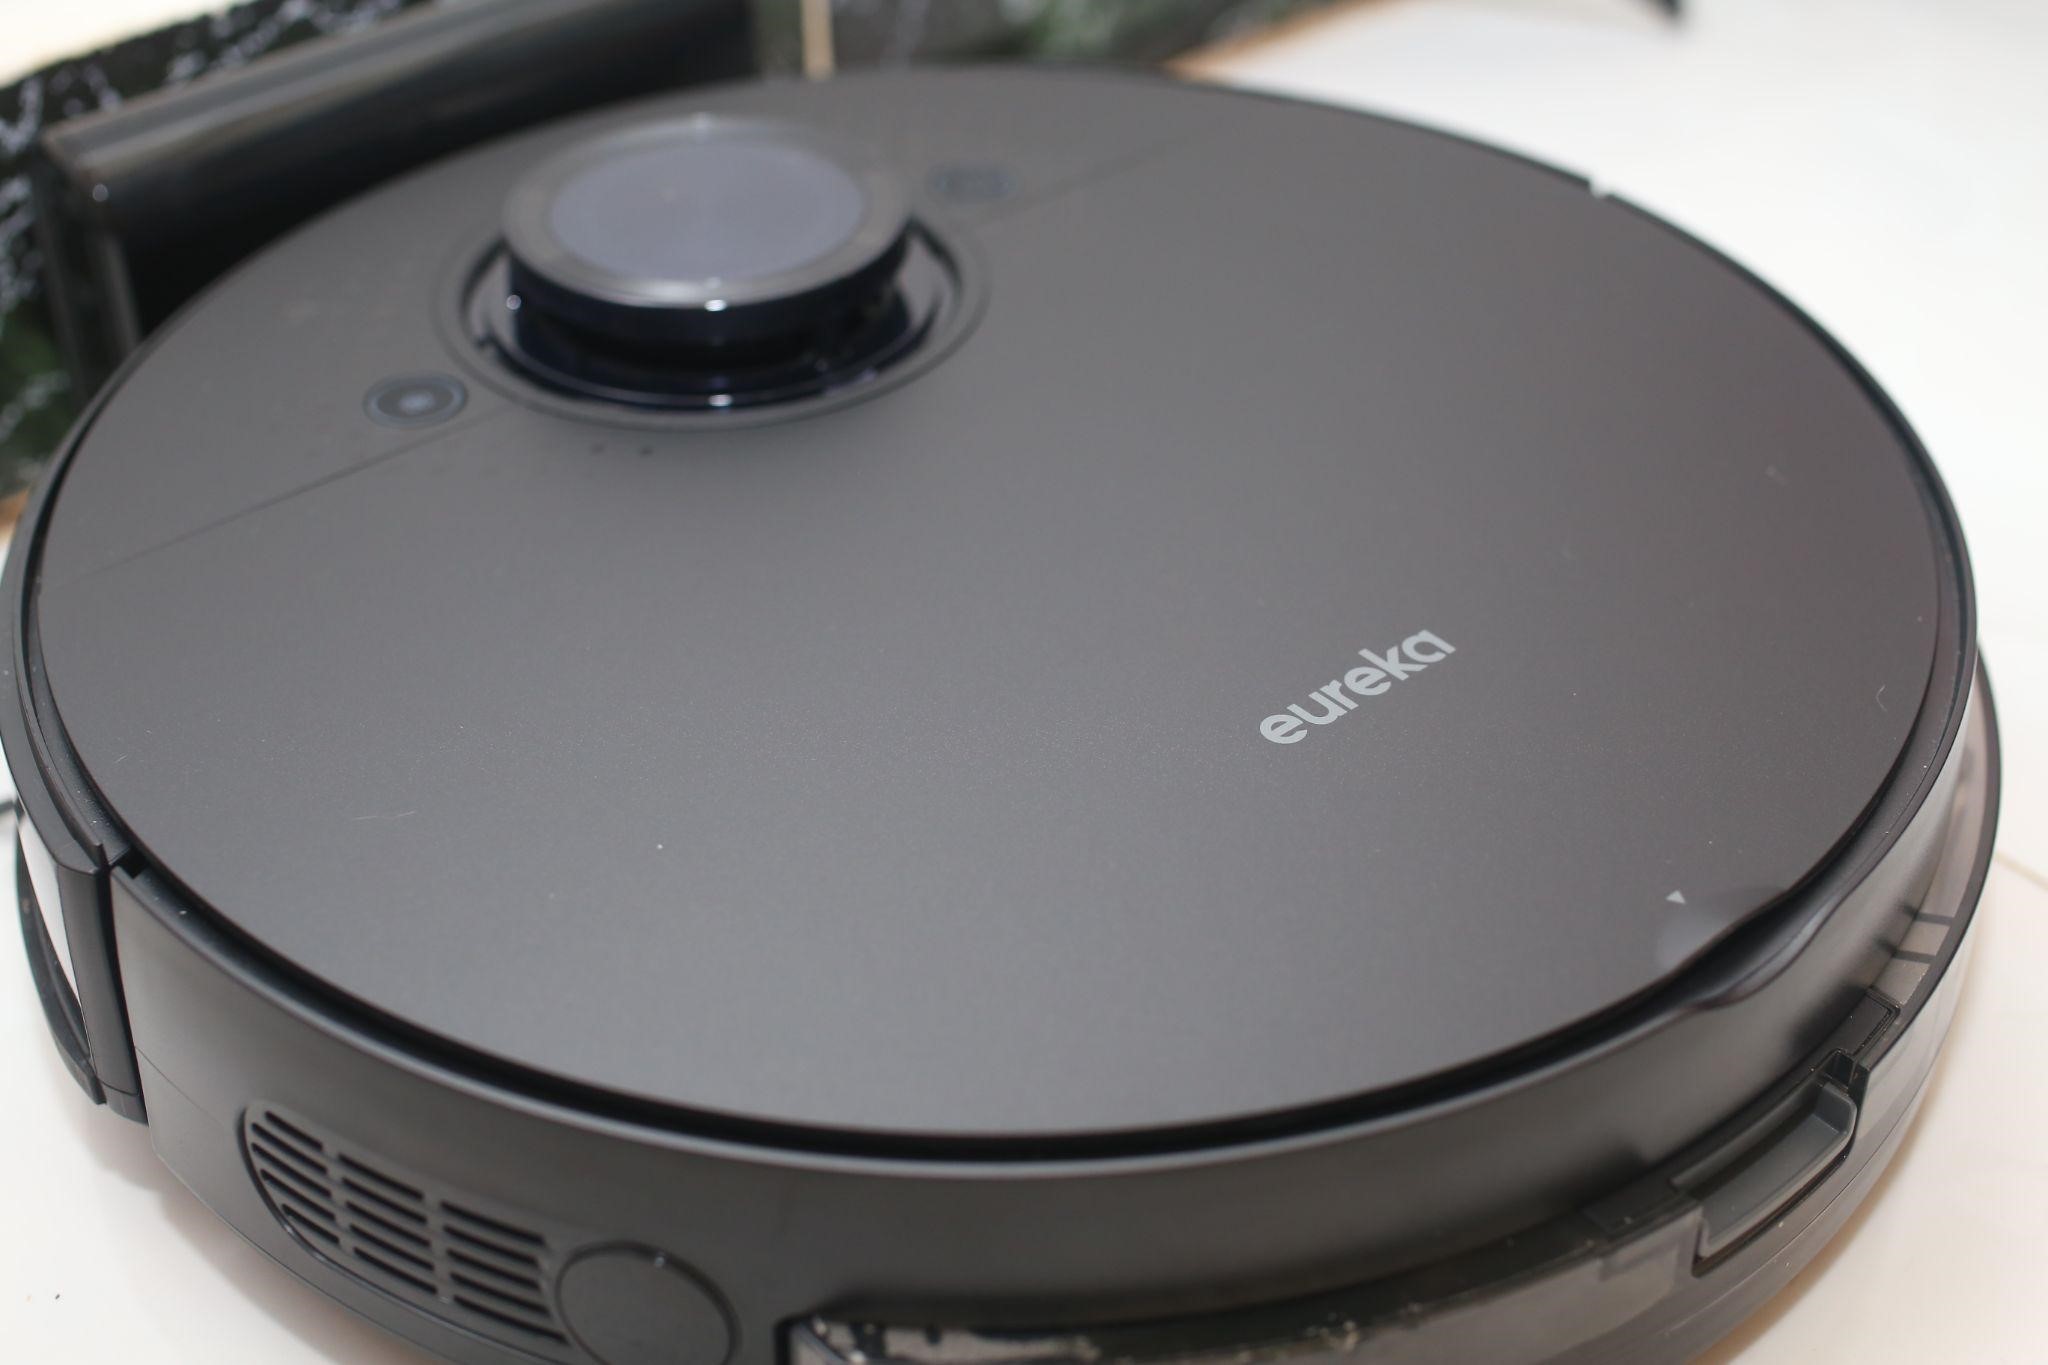 On hand robot vacuum cleaner Eureka NER 800: Too many things to try - 1